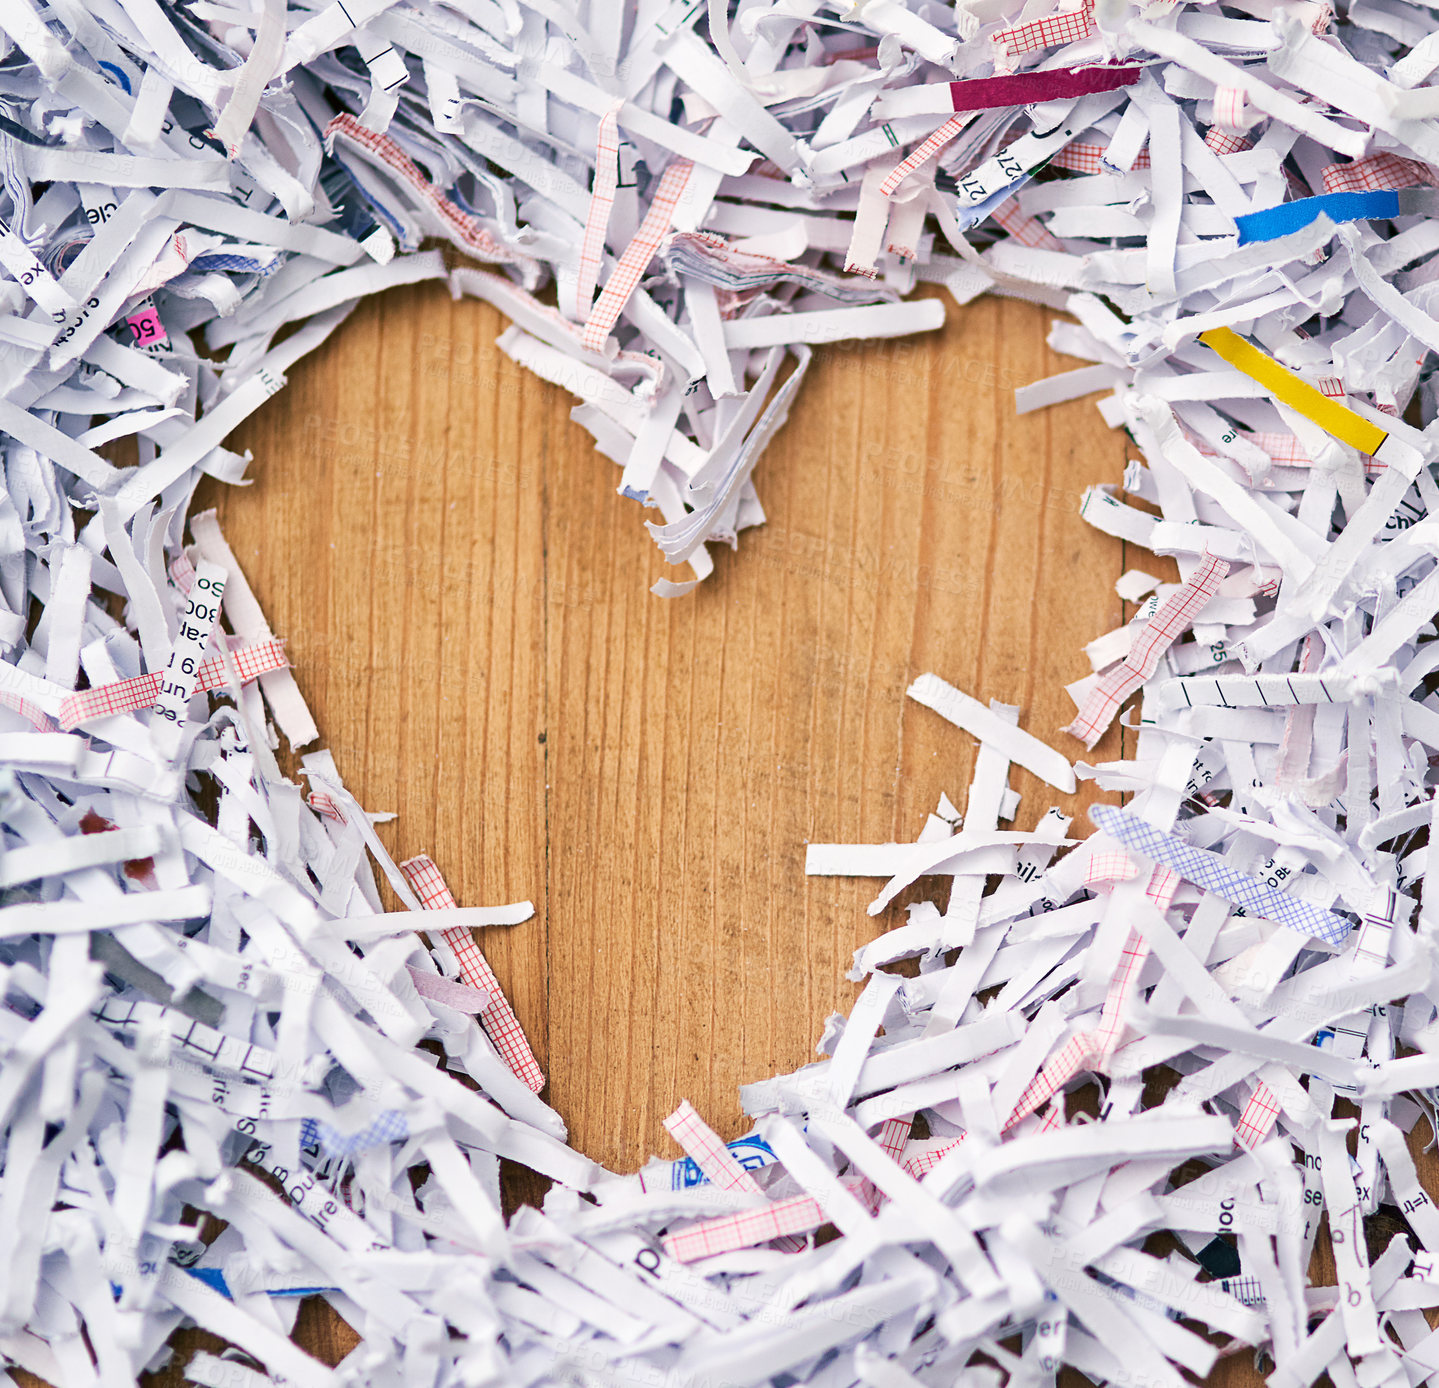 Buy stock photo Studio shot of shredded paper arranged in the shape of a heart on a wooden table